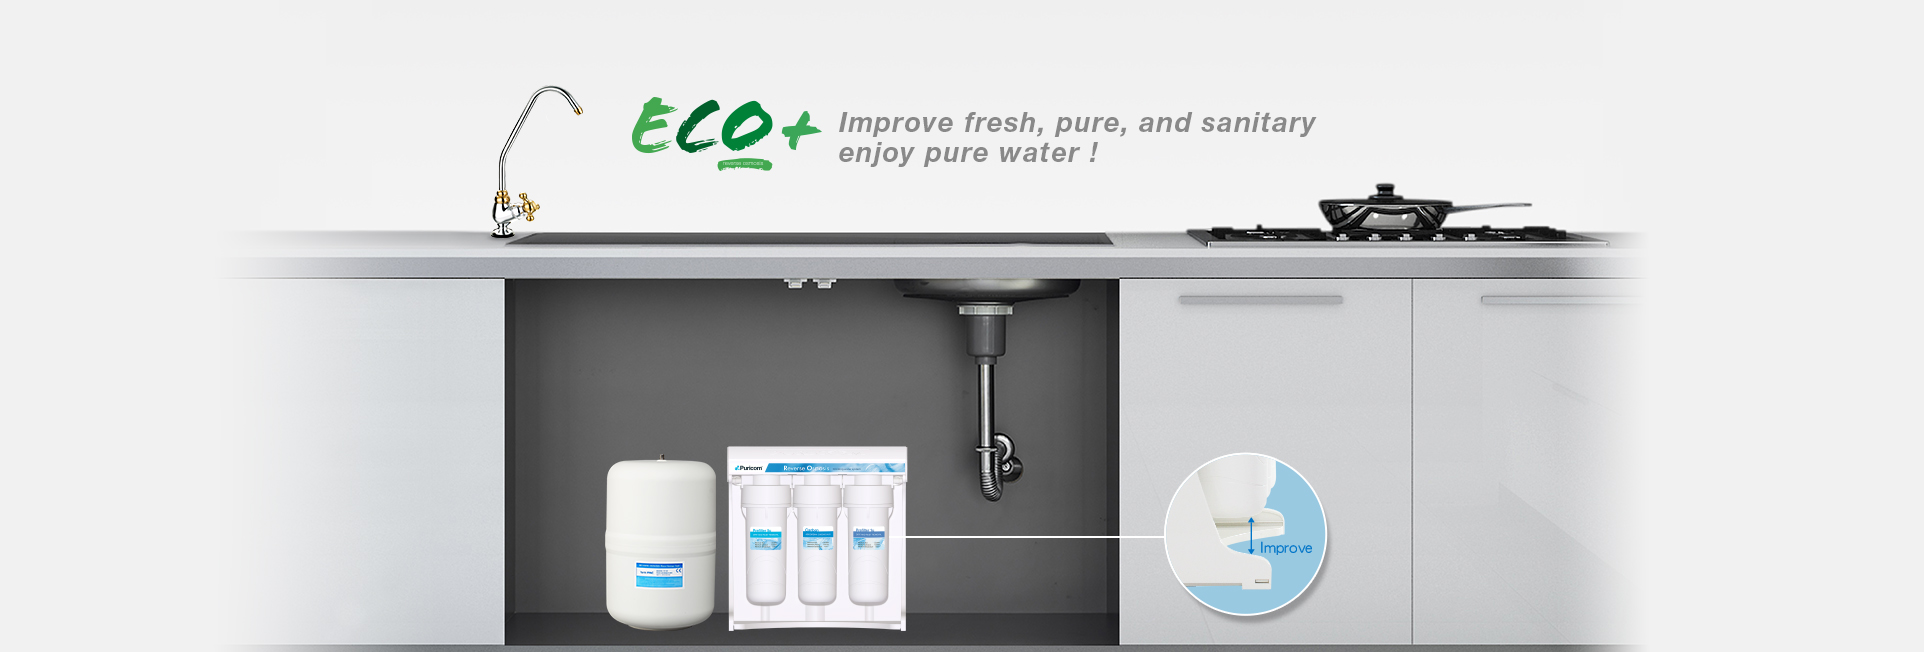 CE-7 Traditional RO System - Improve Fresh, Pure, and Sanitary to Enjoy Pure Water!